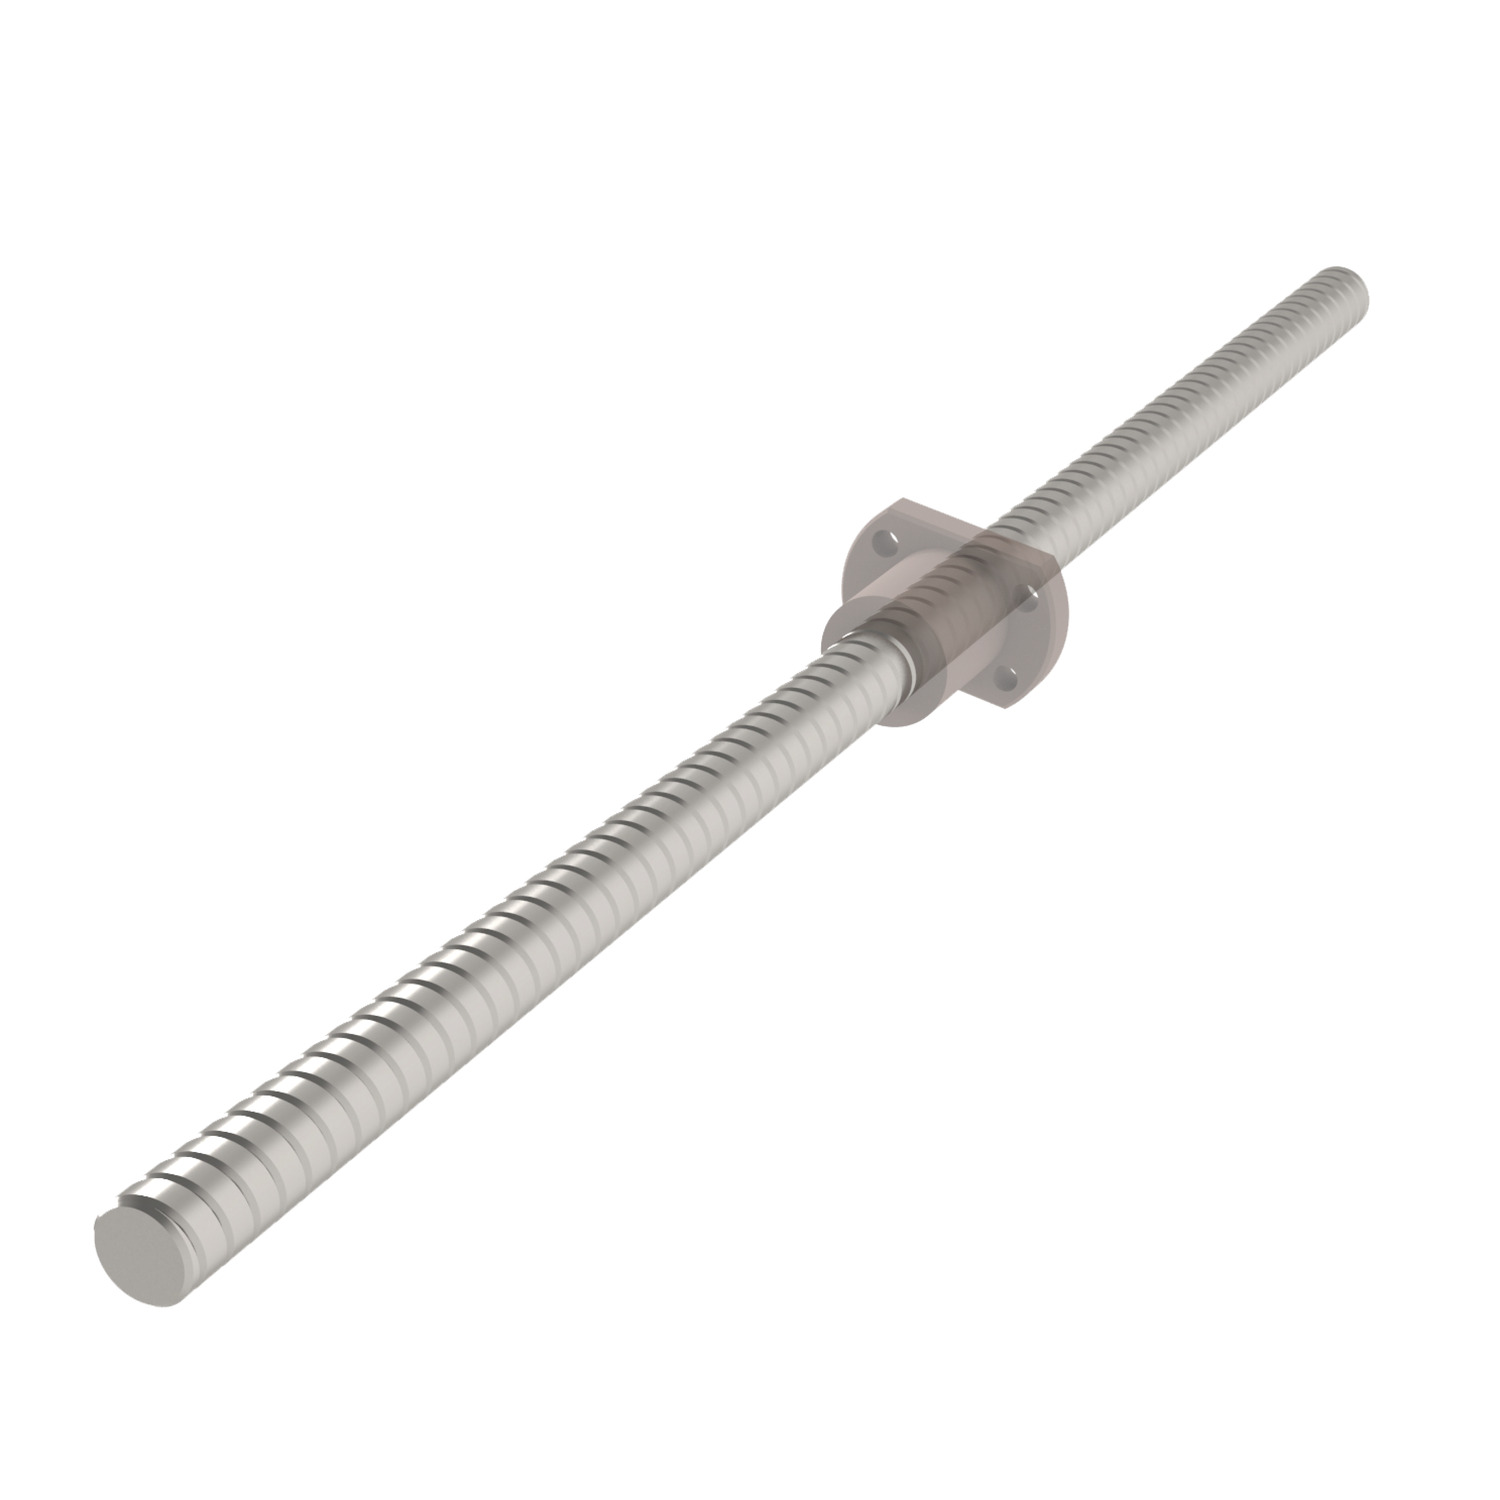 High Helix Lead Screws - Stainless Stainless SUS 304, high helix lead screw. High precision. See L1350 for corresponding nut.